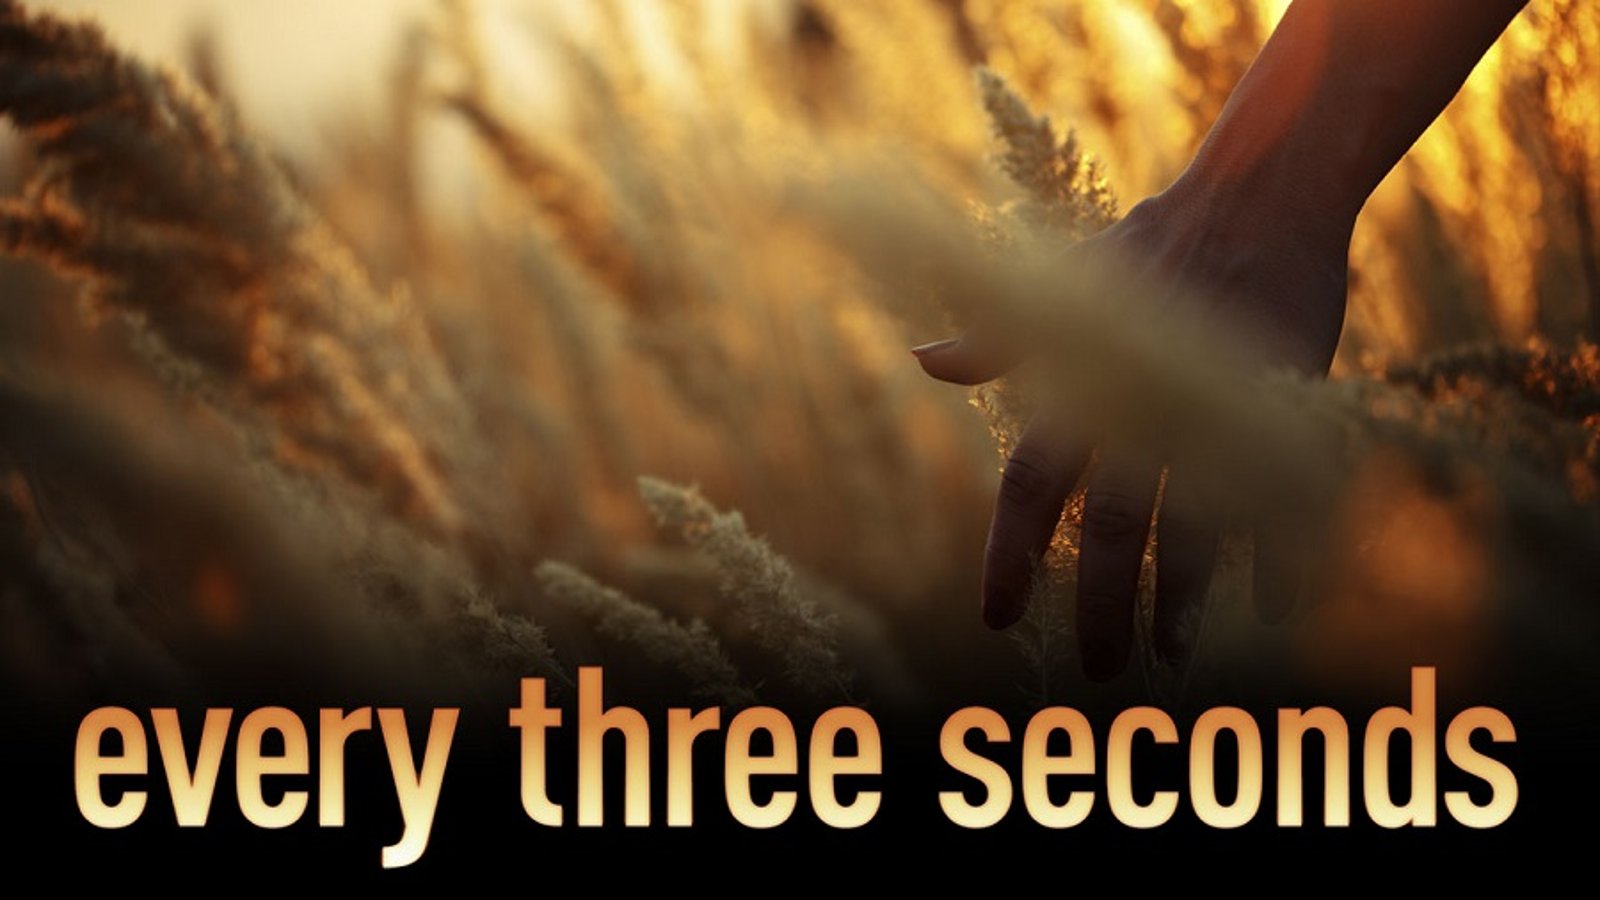 Every Three Seconds - Choosing Action Over Apathy